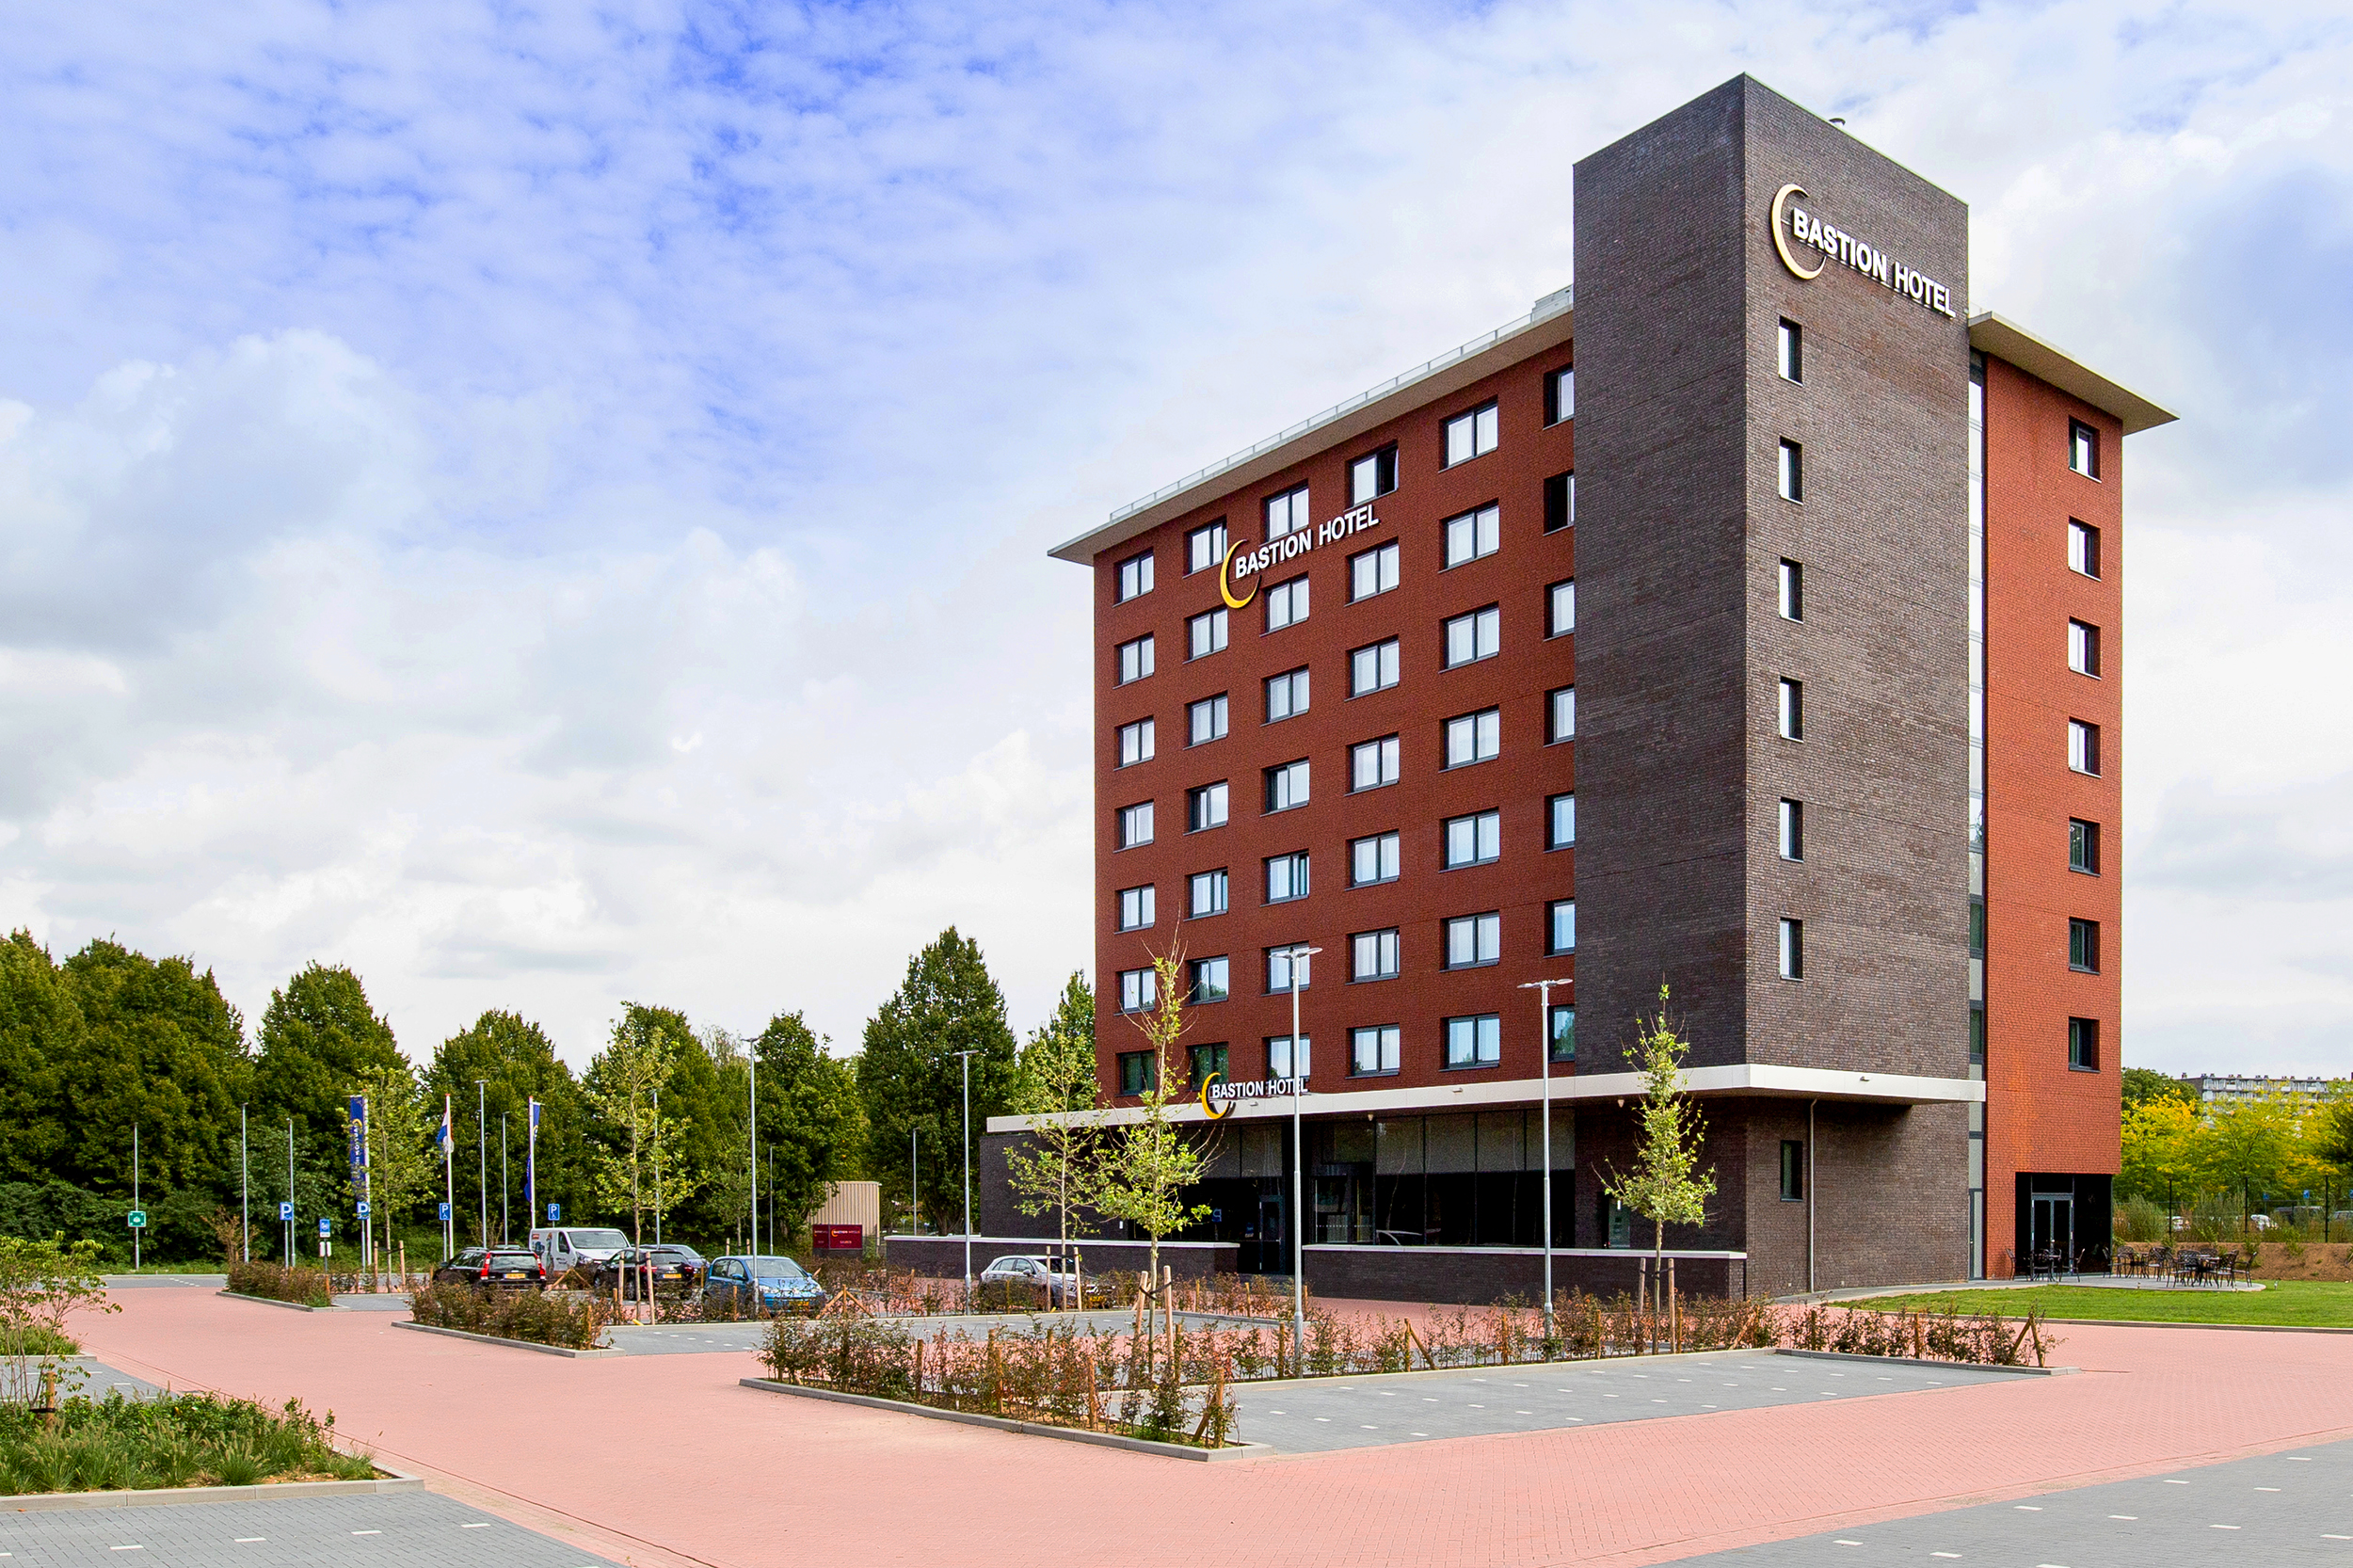 Bastion Hotel Geleen <br/>61.00 ew <br/> <a href='http://vakantieoplossing.nl/outpage/?id=cc7ca4d82a2113039a471617e664823d' target='_blank'>View Details</a>